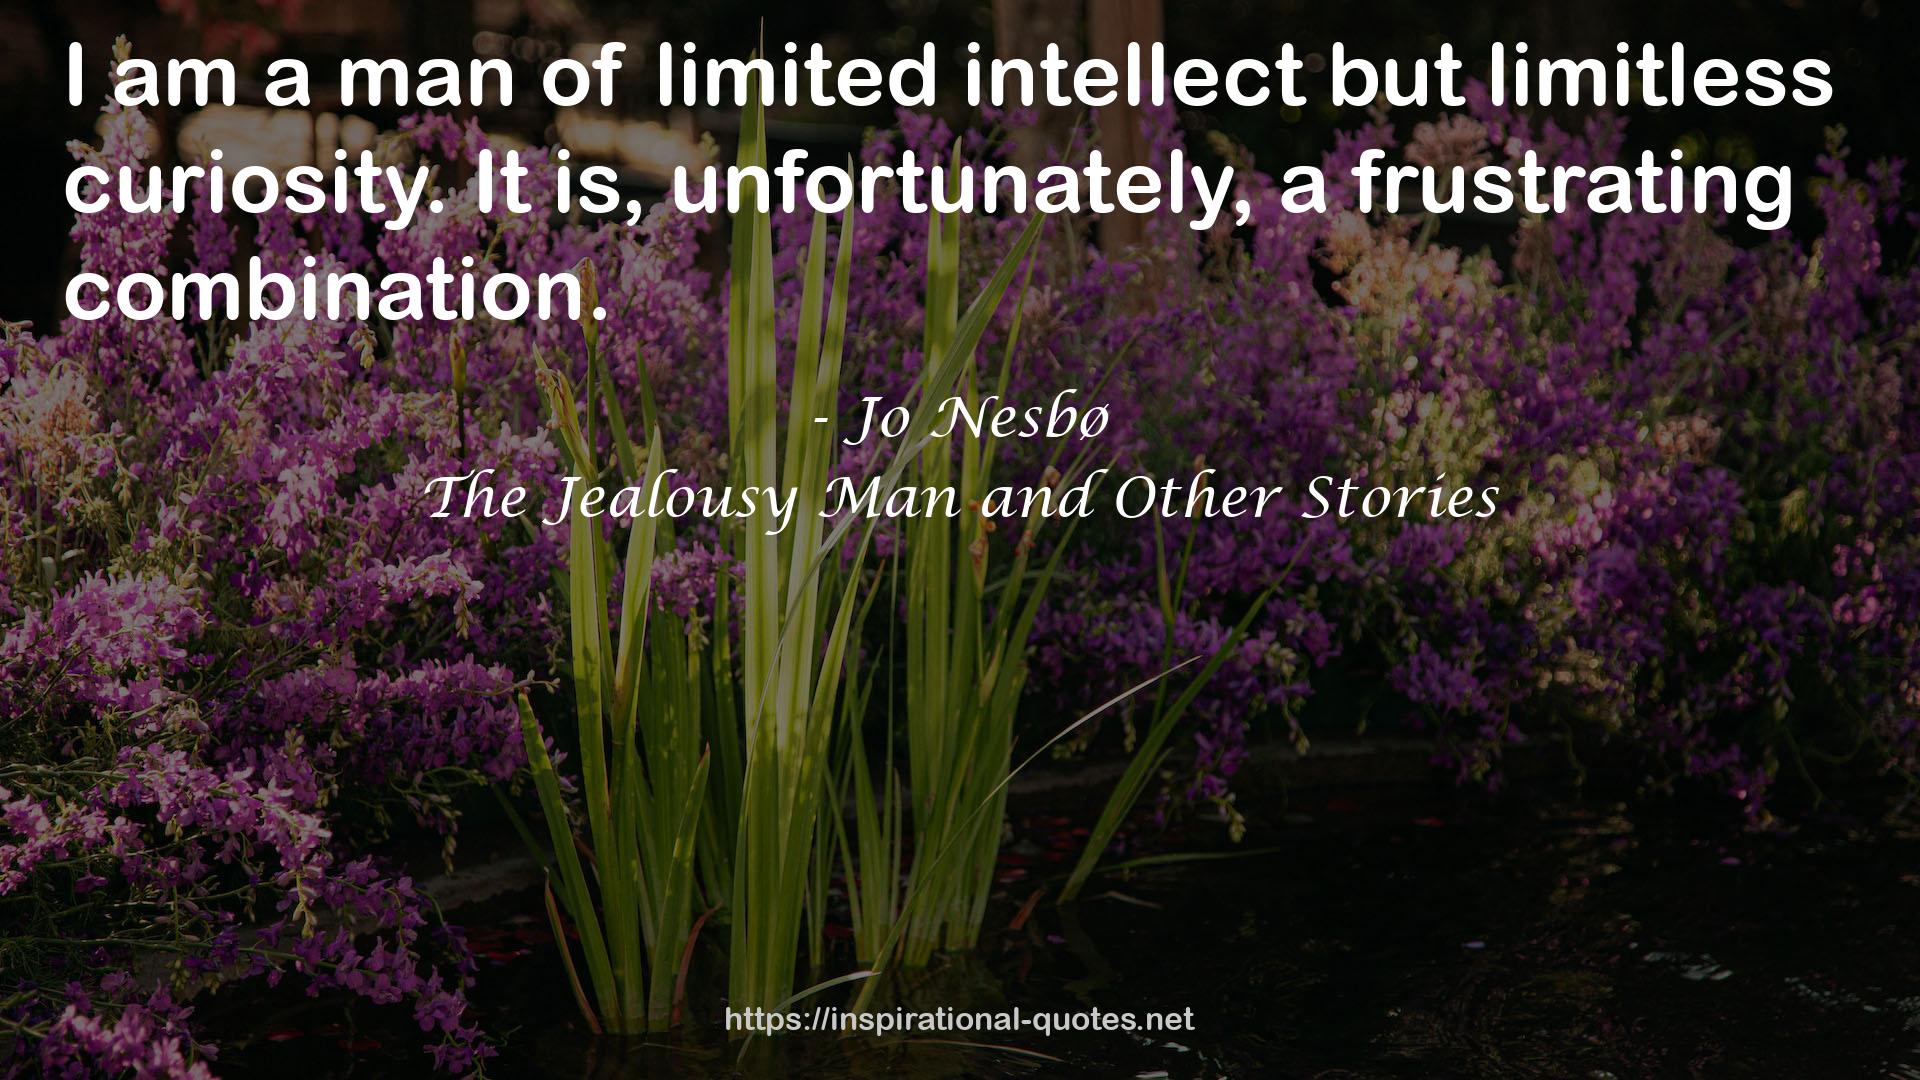 The Jealousy Man and Other Stories QUOTES